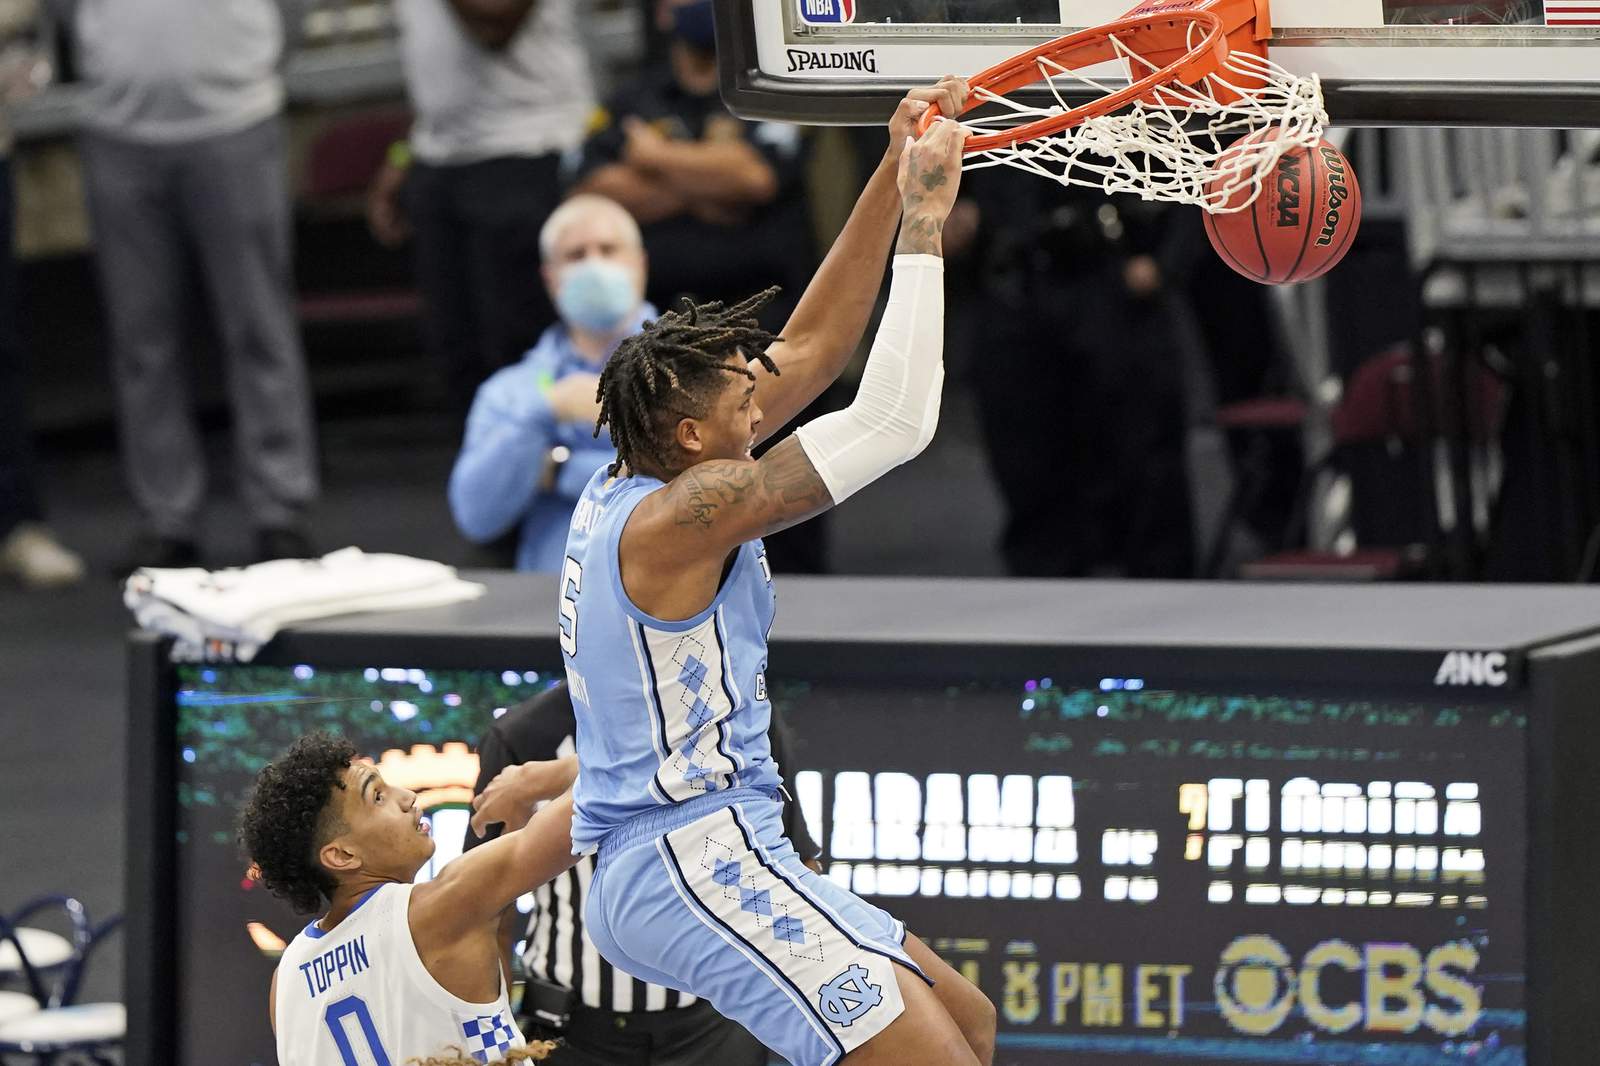 No. 22 Tar Heels top Kentucky for Wildcats' 5th loss in row